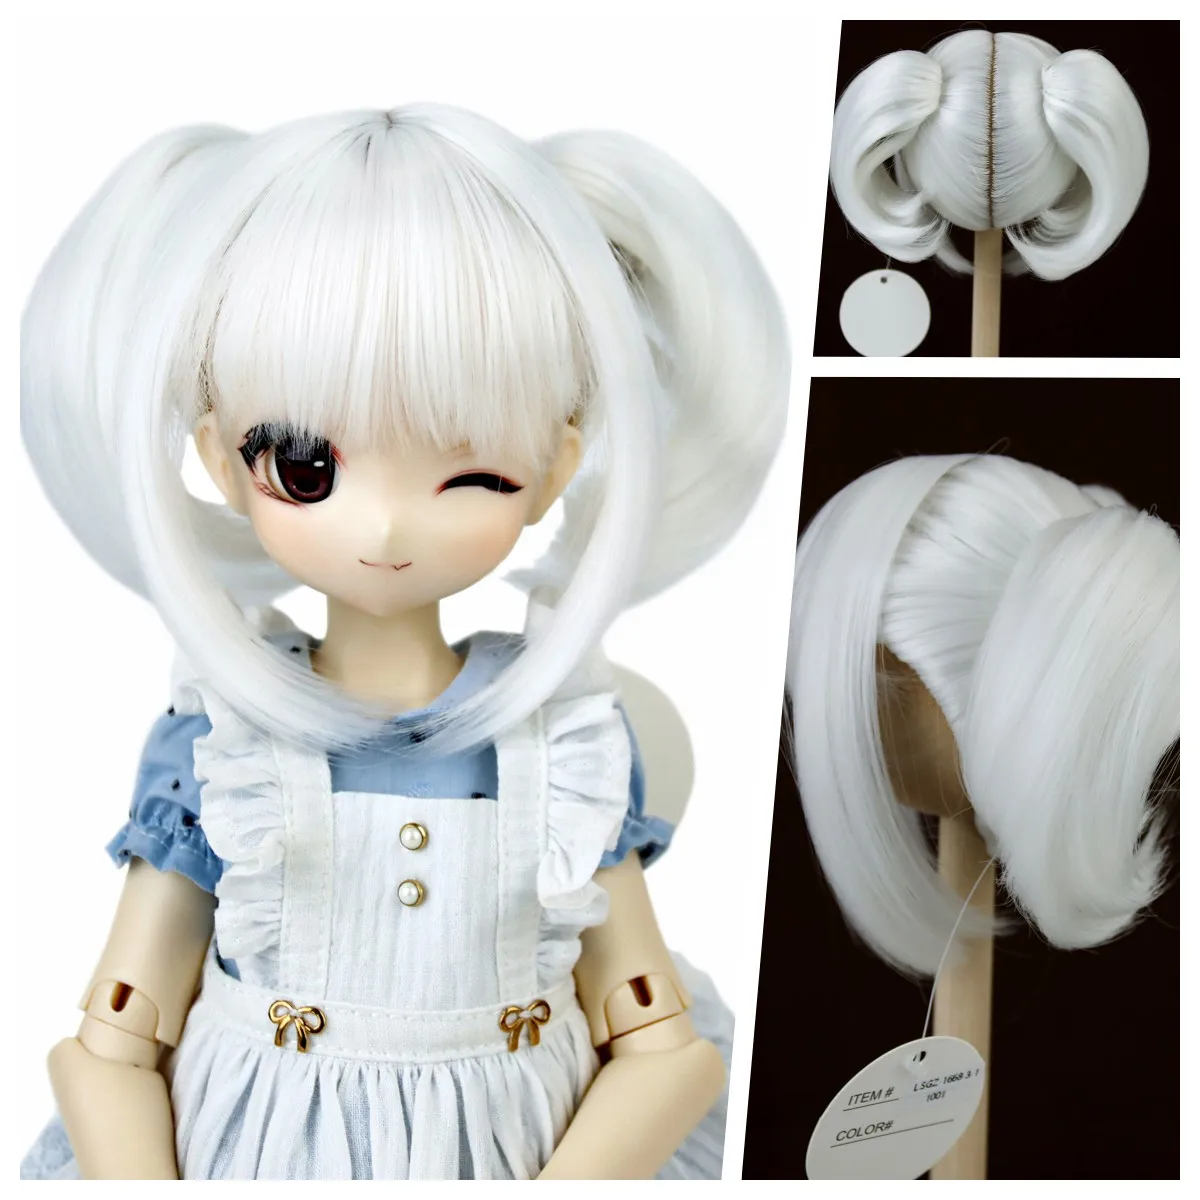 1/3 BJD Wigs 8-9 inch Head White Bobo With Pigtails Short Bangs Heat Resistant Fiber Hair For SD Dollfie Dream Doll Accessories